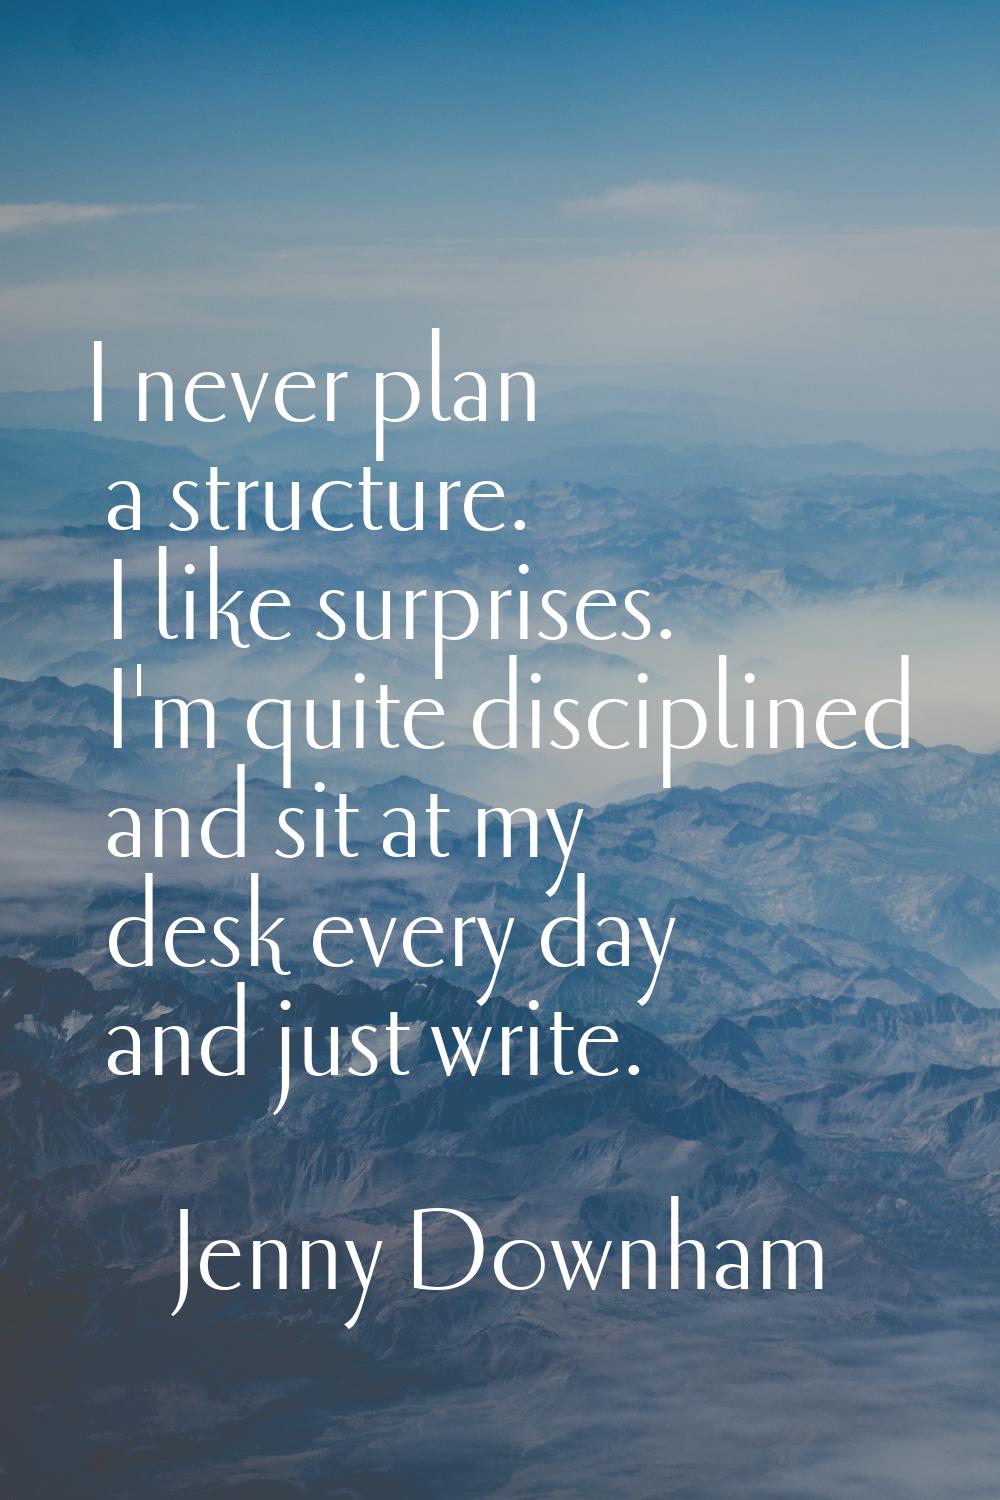 I never plan a structure. I like surprises. I'm quite disciplined and sit at my desk every day and 